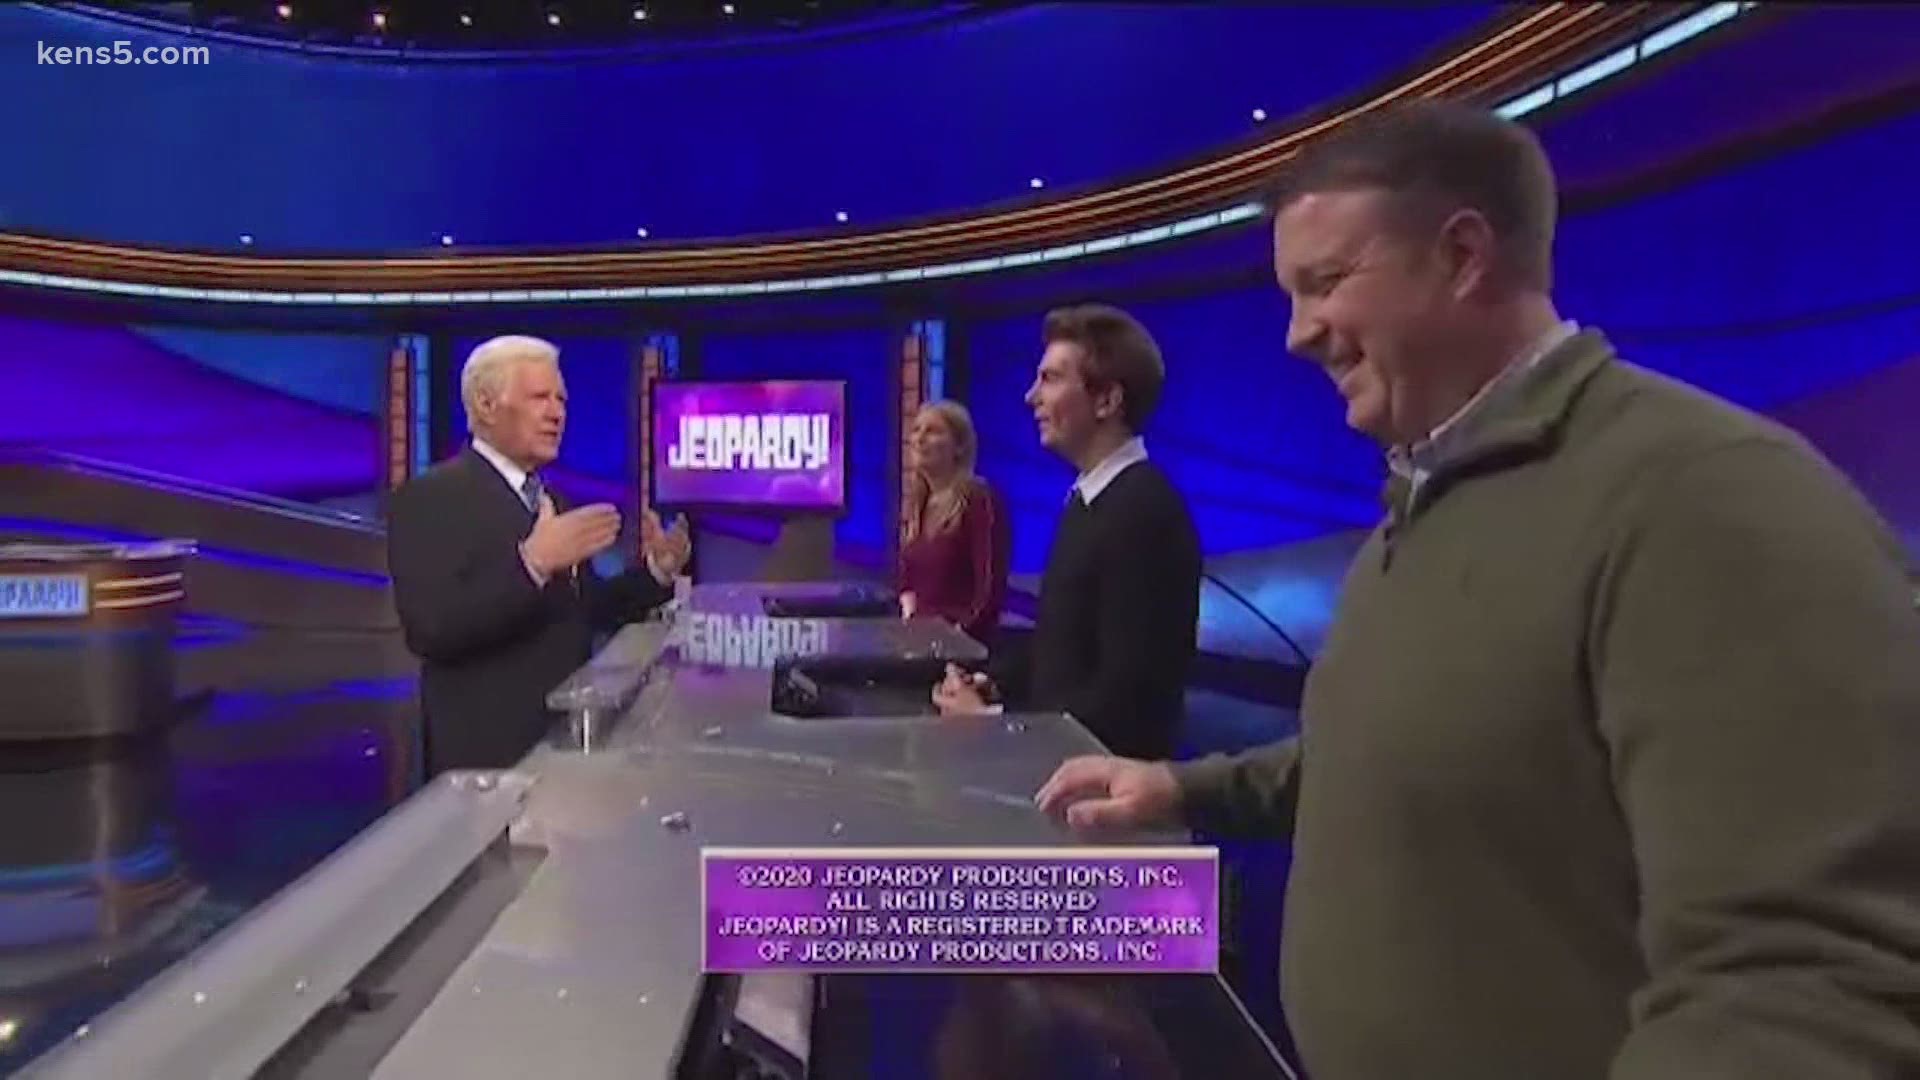 “I think this is everybody's loss.” said Jack McGuire, who called Trebek authentic, and a "consummate professional."